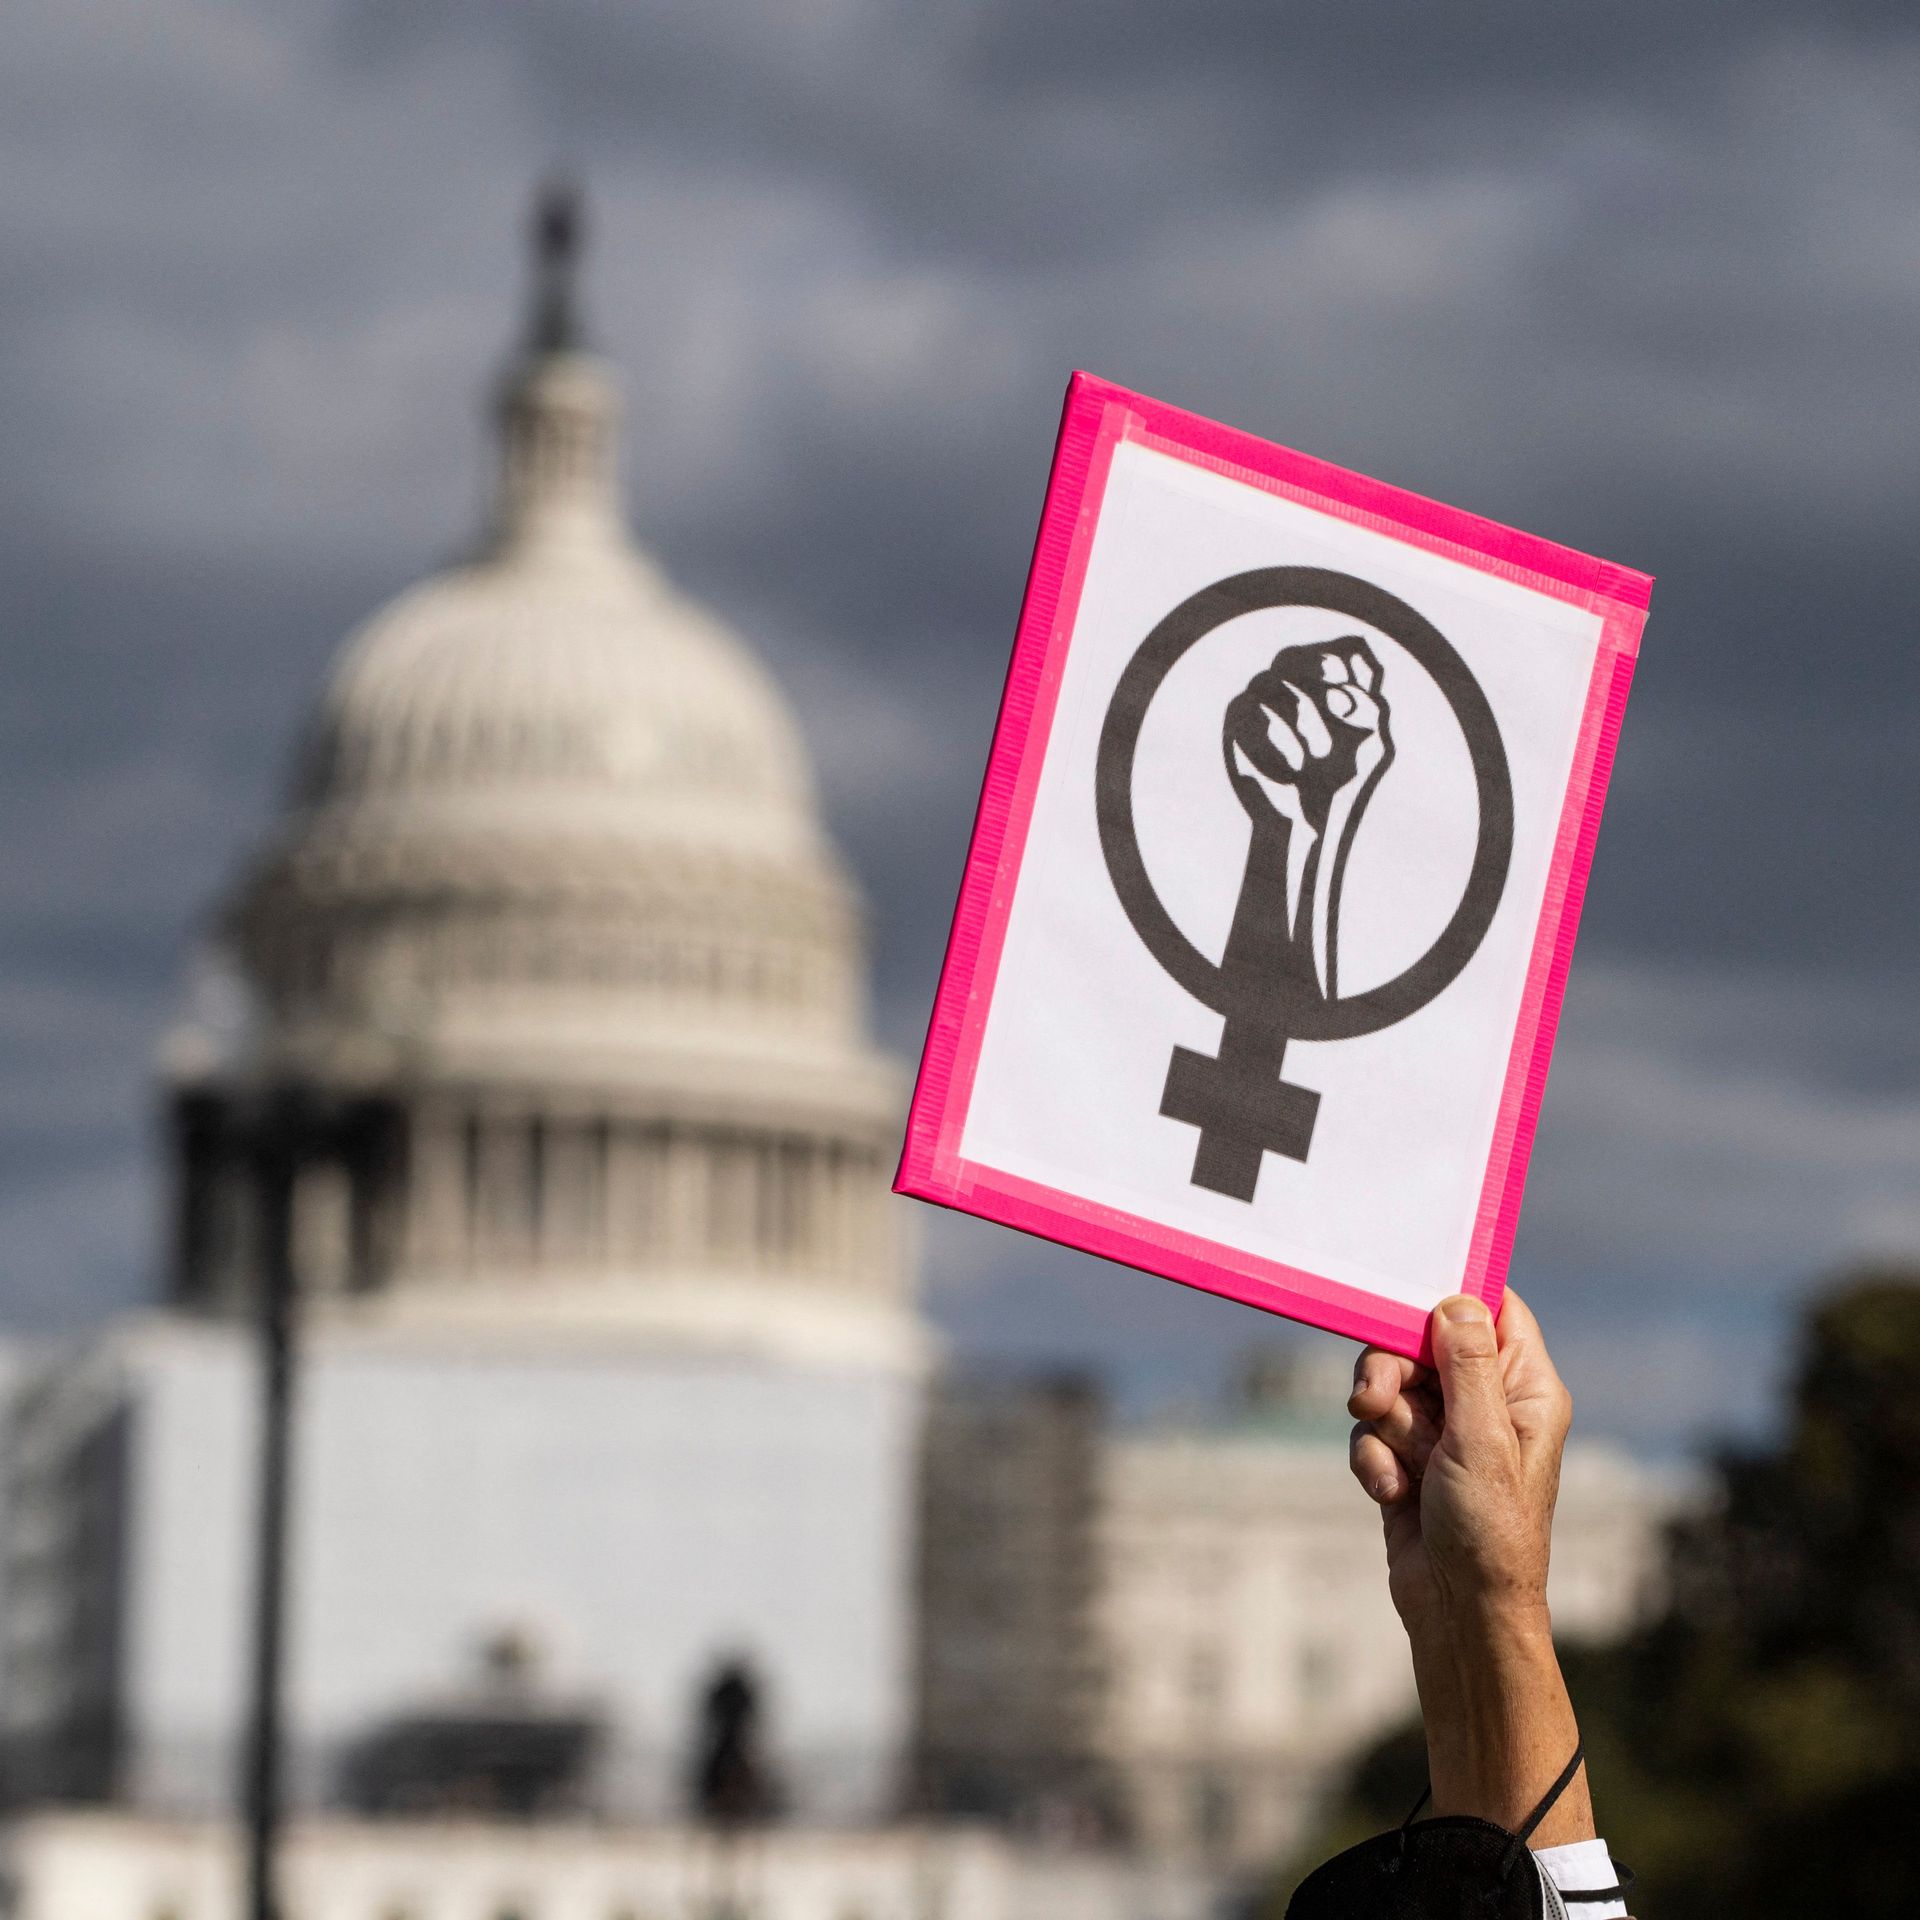 Photo of a hand raising an abortion rights sign against the backdrop of the U.S. Capitol